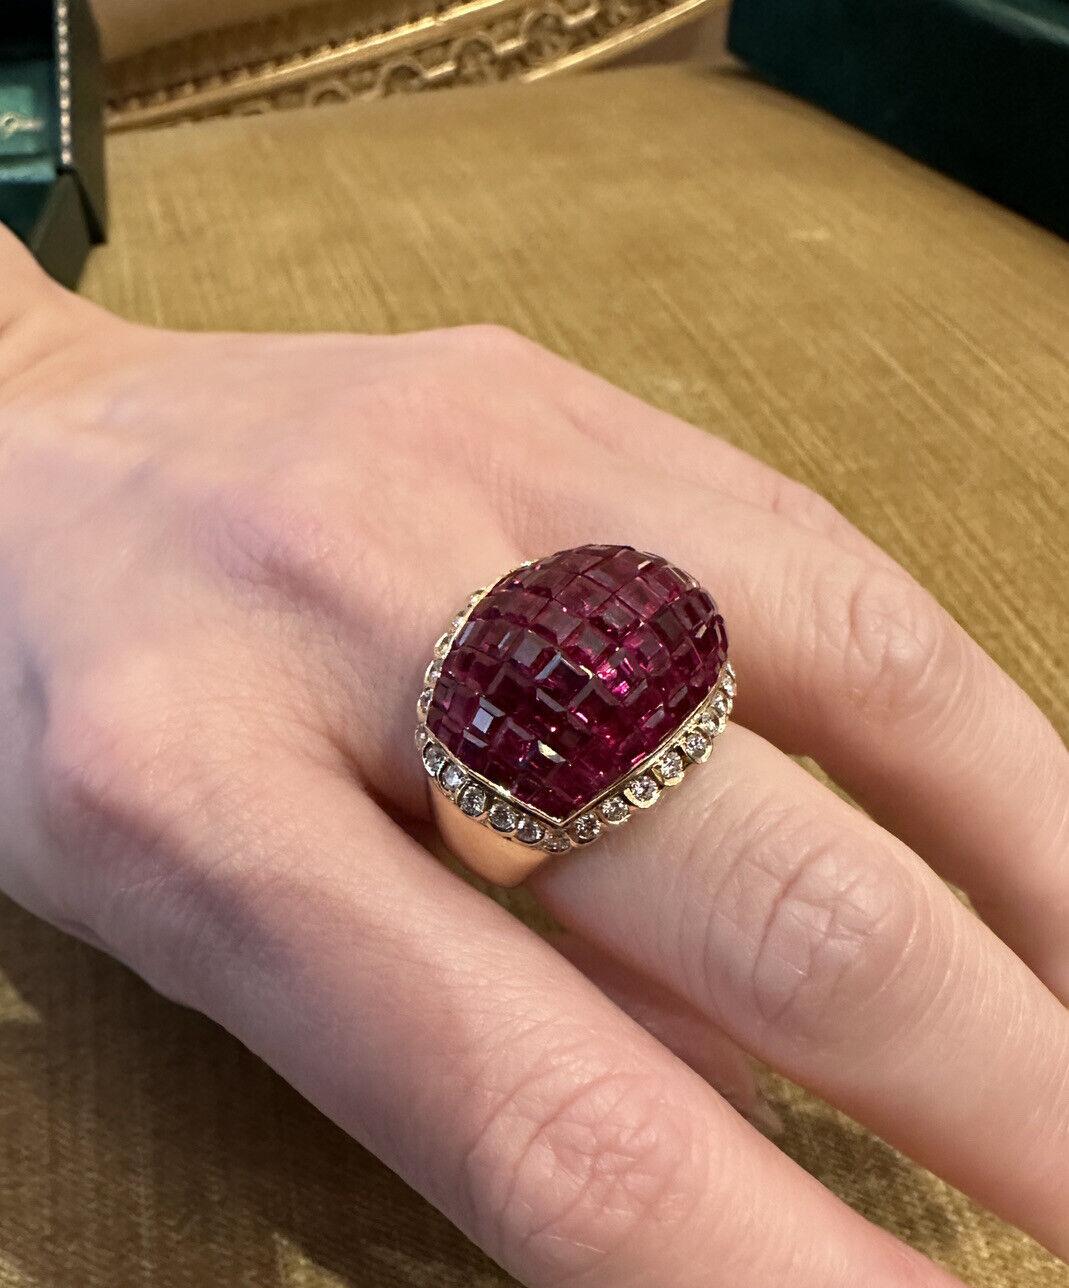 Wide Ruby and Diamond Bombe Ring in 18k Yellow Gold

Mystery Set Ruby & Diamond Bombe Dome Ring features Calibrated Rubies Mystery set in Dome style bordered by Round Brilliant Diamonds with Scalloped edge set in 18k Yellow Gold.

Total ruby weight